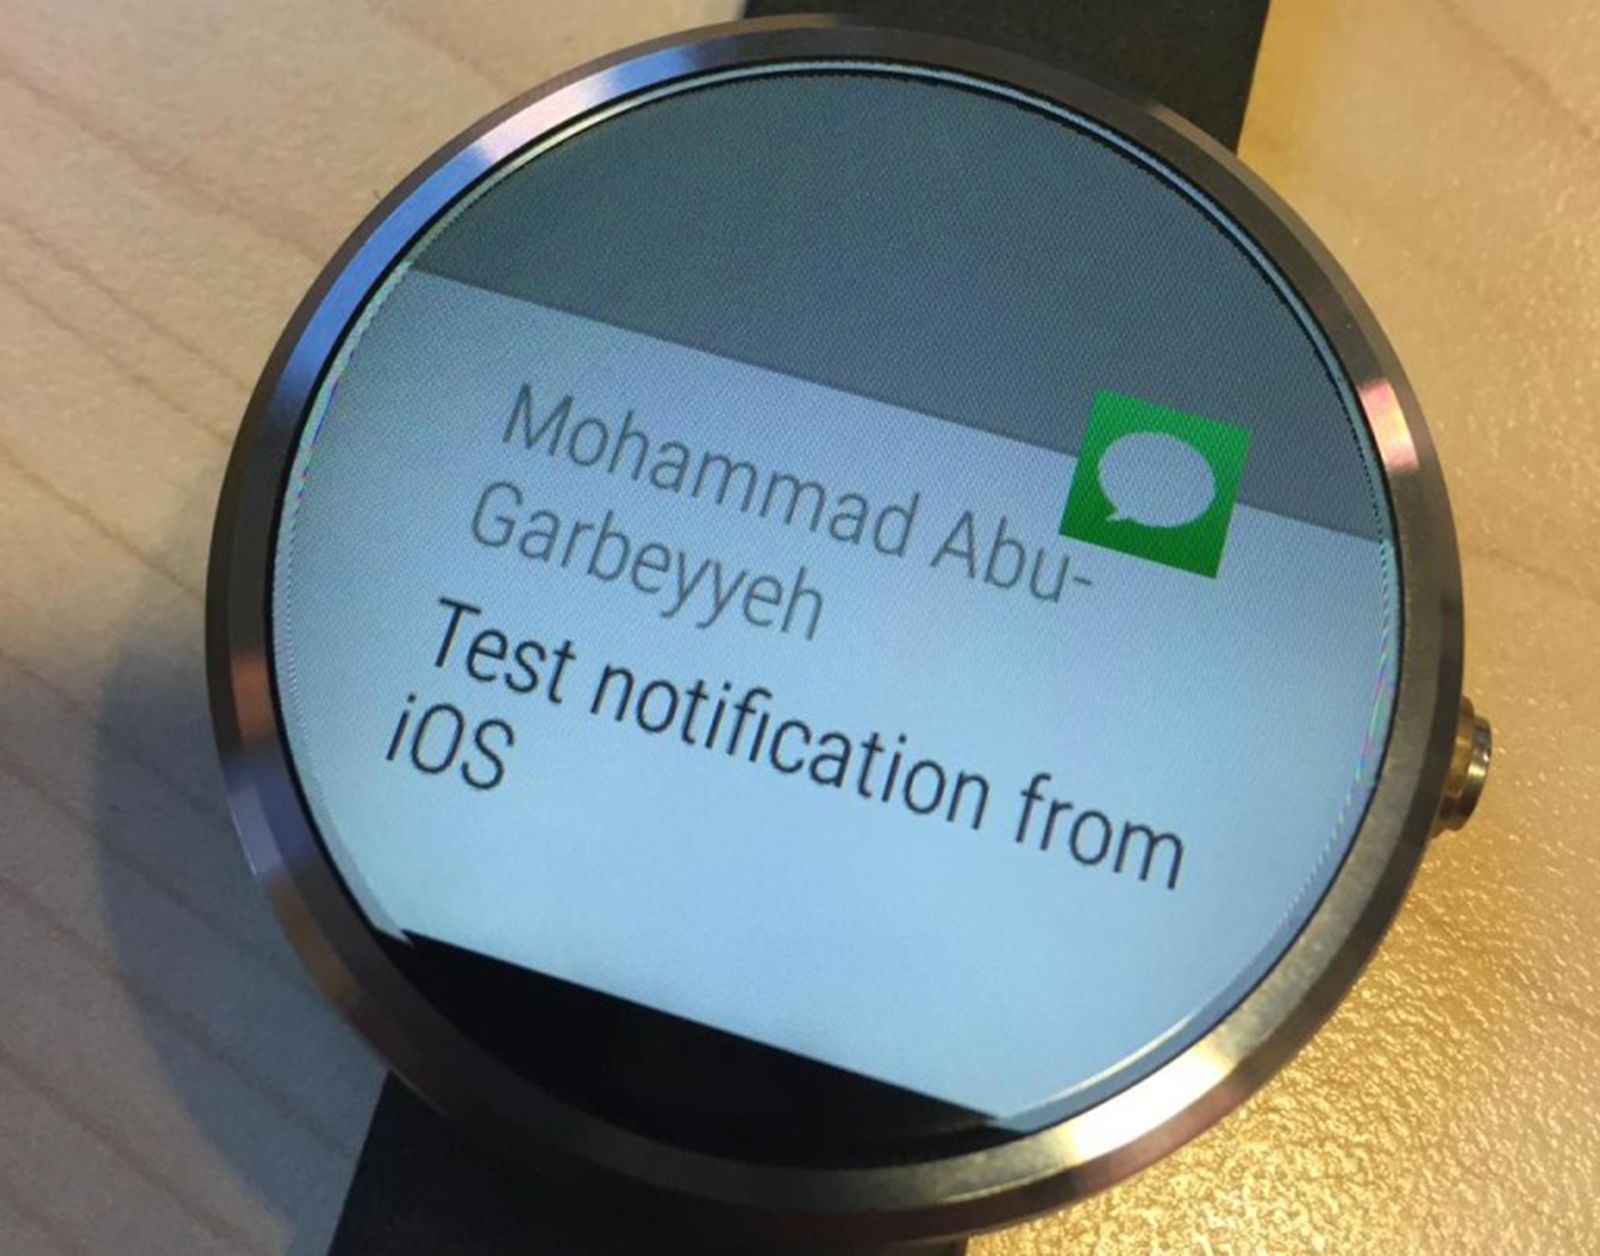 apple watch taking too long android wear for iphone is now a thing image 1